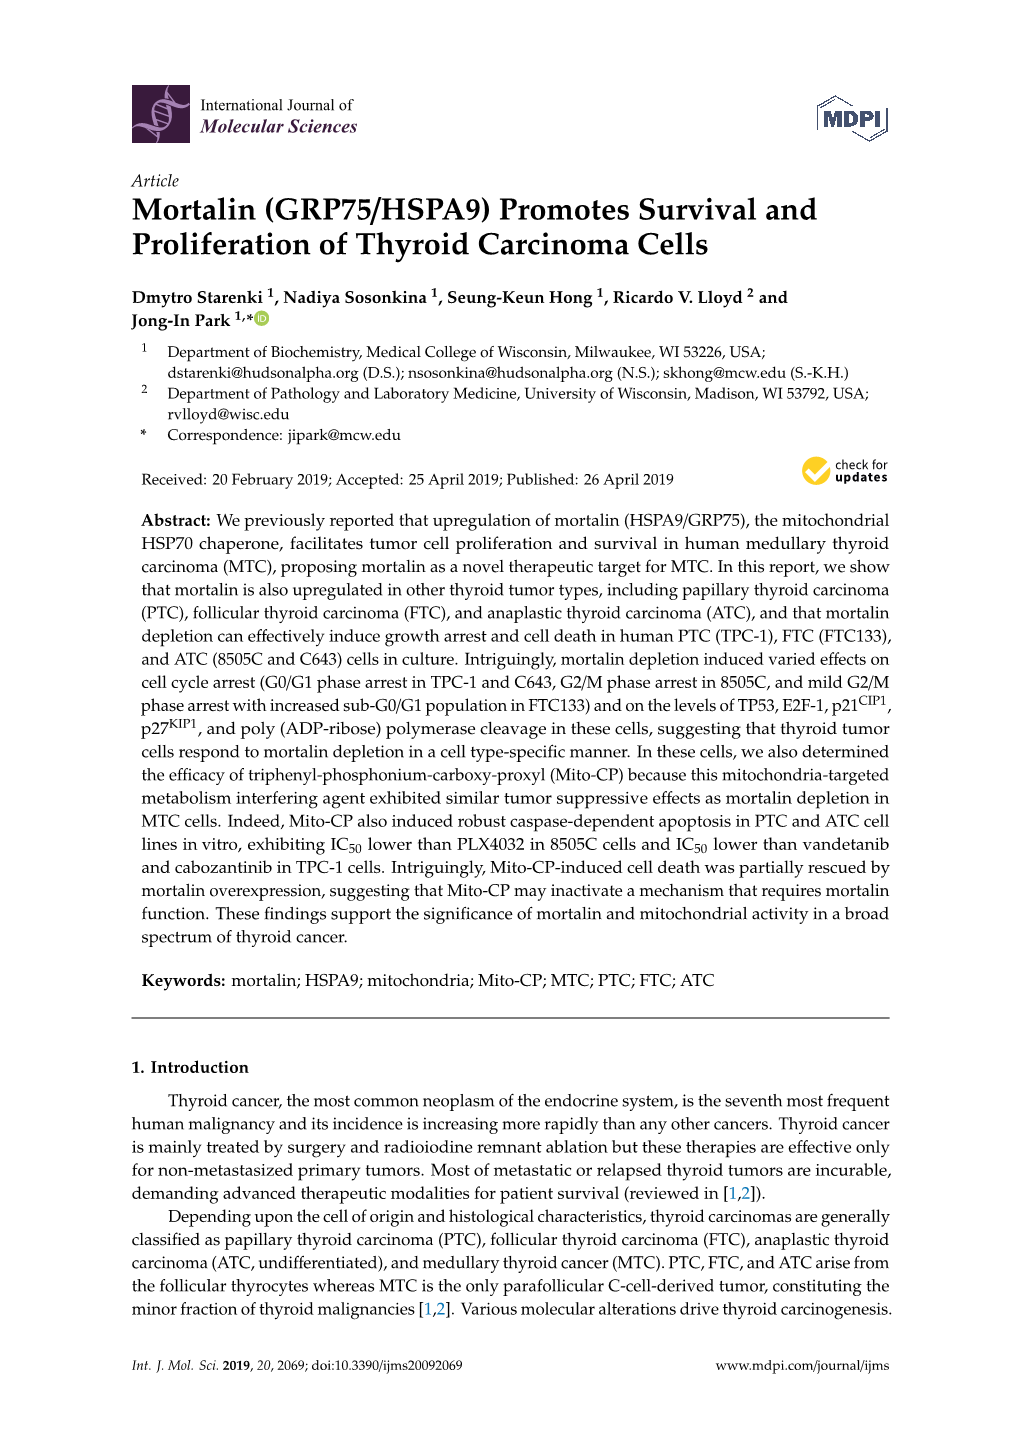 Mortalin (GRP75/HSPA9) Promotes Survival and Proliferation of Thyroid Carcinoma Cells